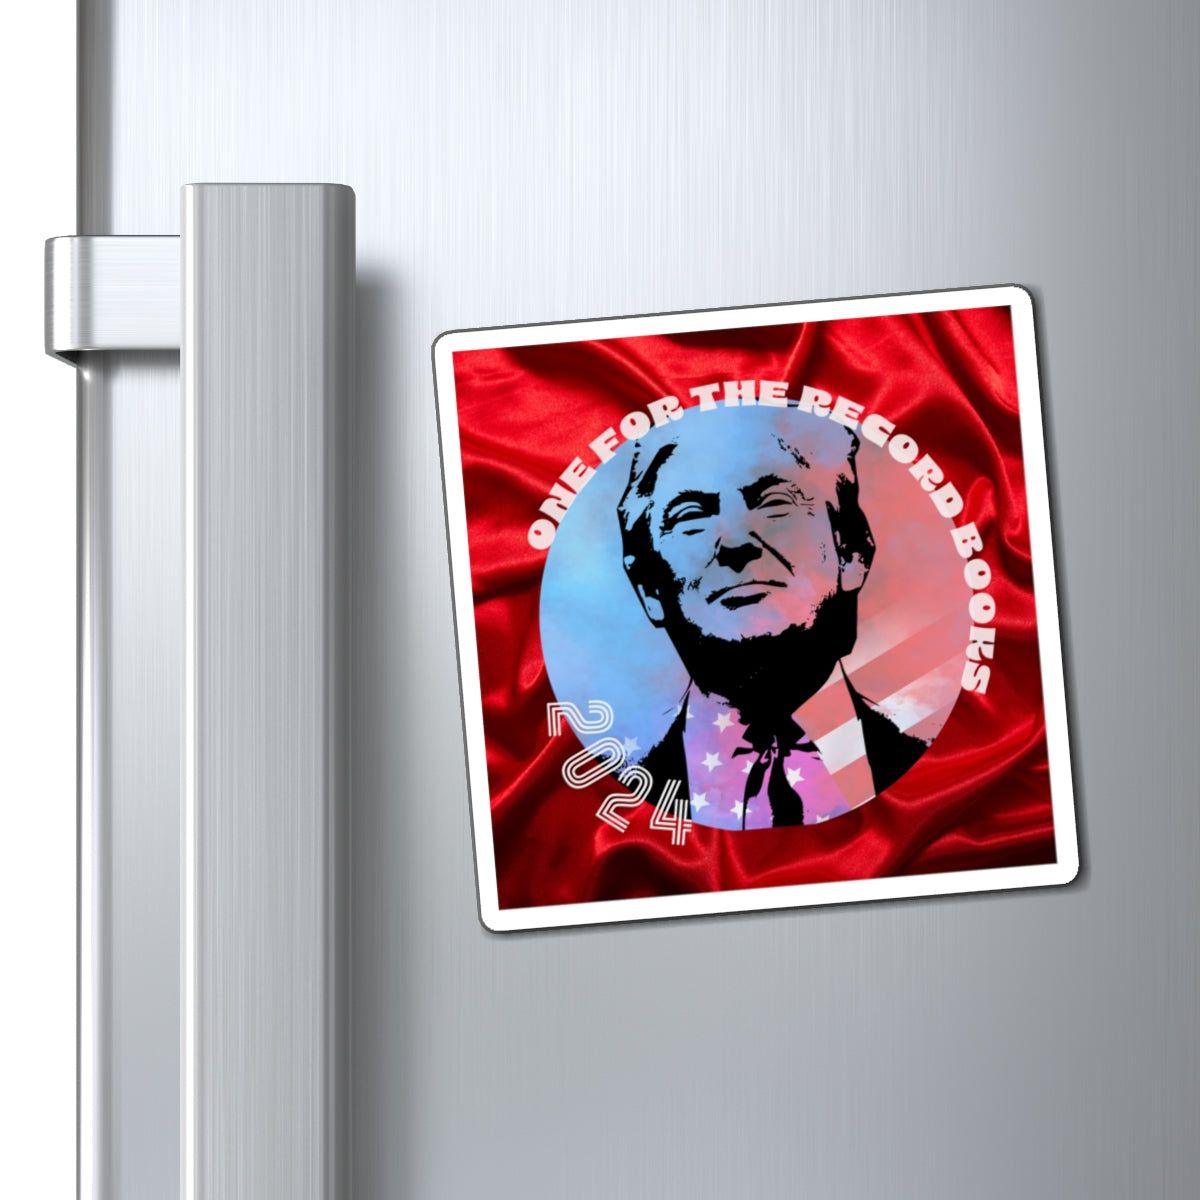 Shop our custom Trump magnets: Buy our Trump 2024 magnets: - Iron Phoenix GHG